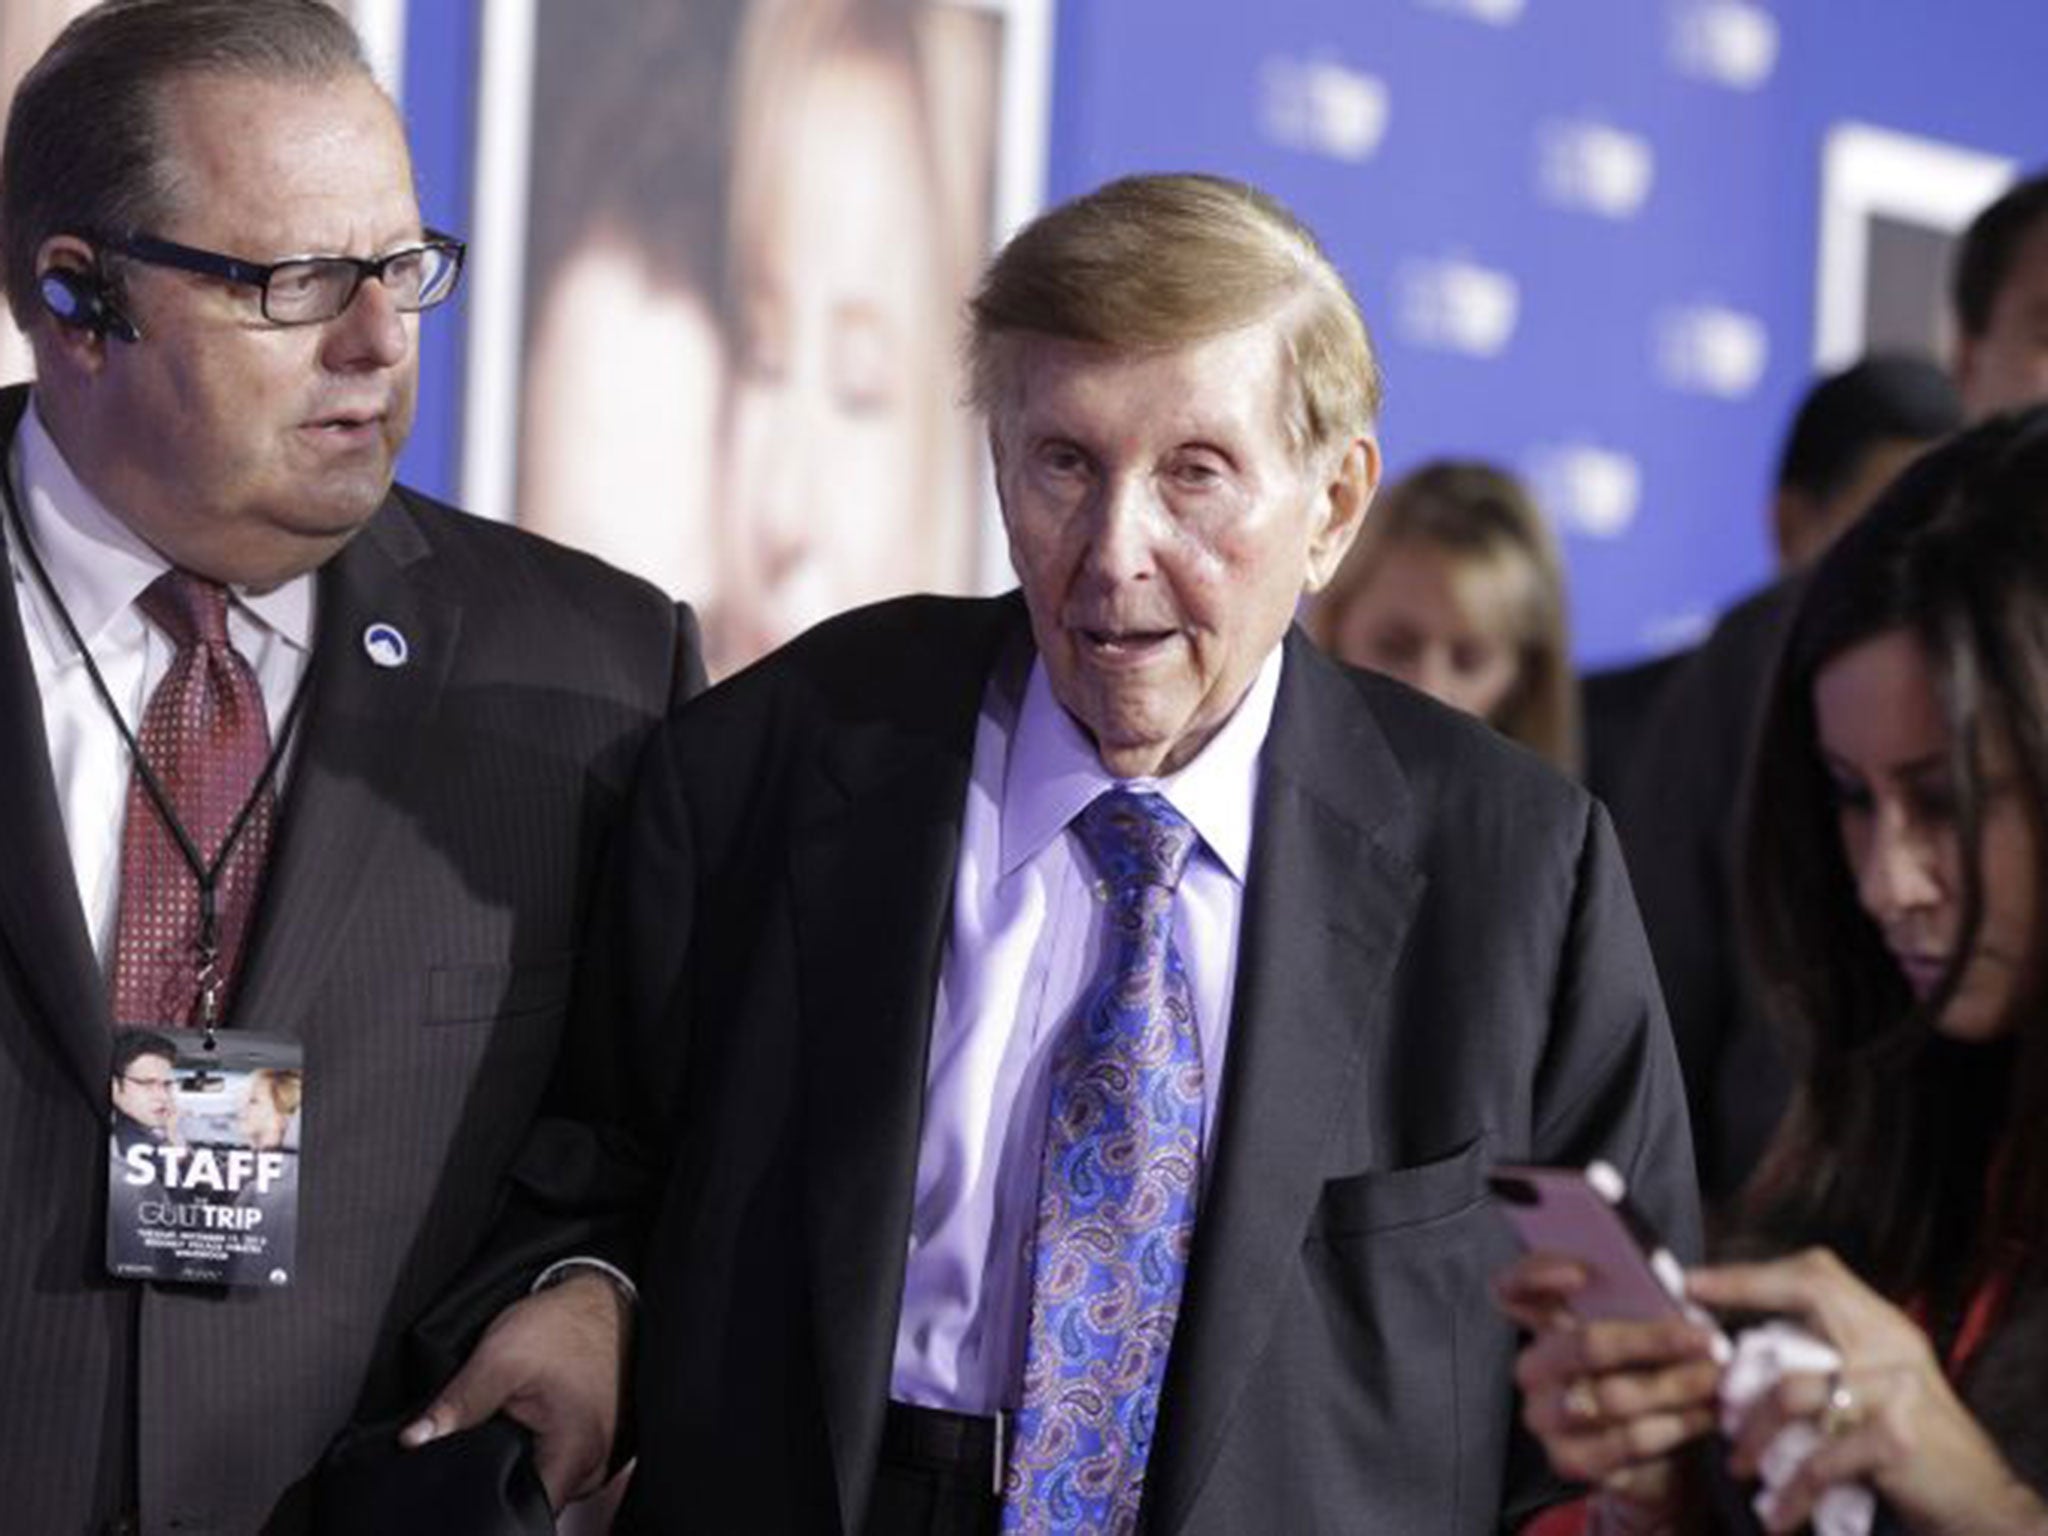 Sumner Redstone: The Viacom patriach's daughter has won control of the business